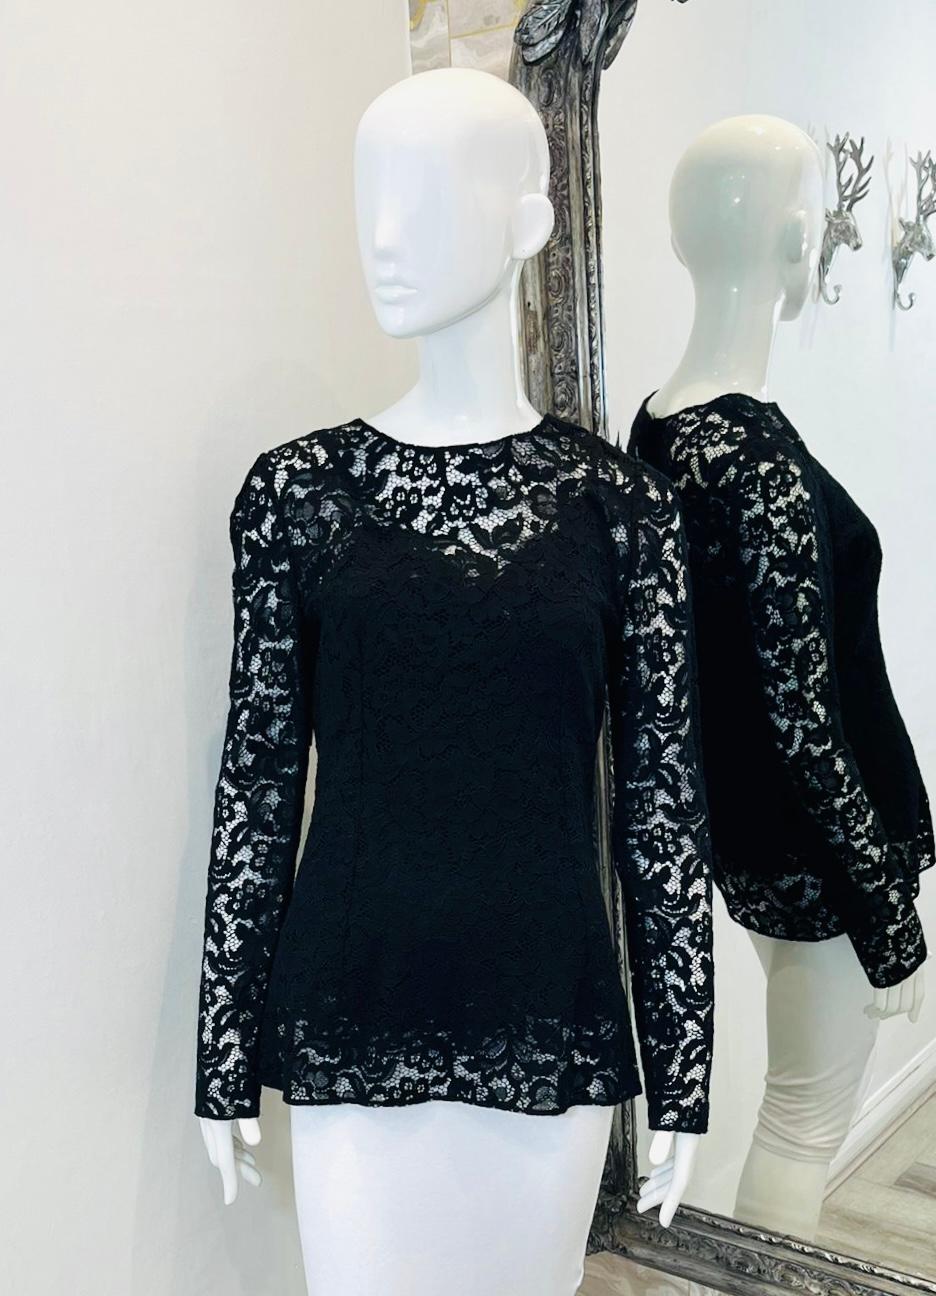 Dolce & Gabbana Lace Top

Black, long sleeved blouse designed with see-through floral lace overlay.

Detailed with slim fit, crew neckline and zip fastening to rear.

Size – 44IT

Condition – Very Good

Composition – 75% Viscose, 25% Nylon; Lining